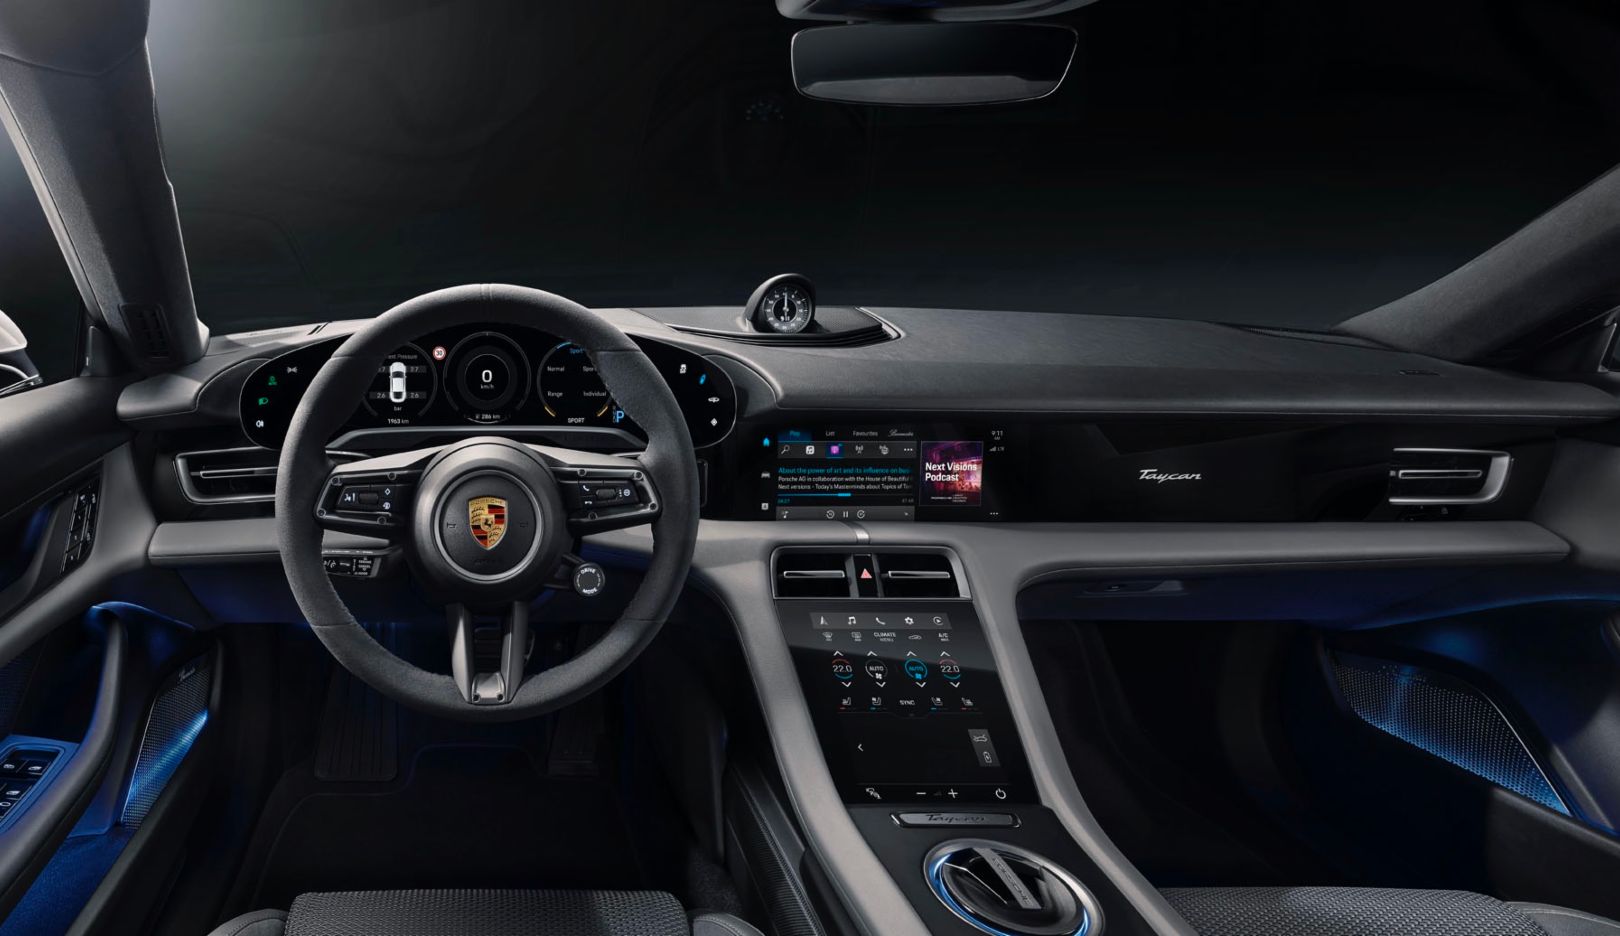 Porsche's 'Soundtrack My Life' delivers custom music based on your driving